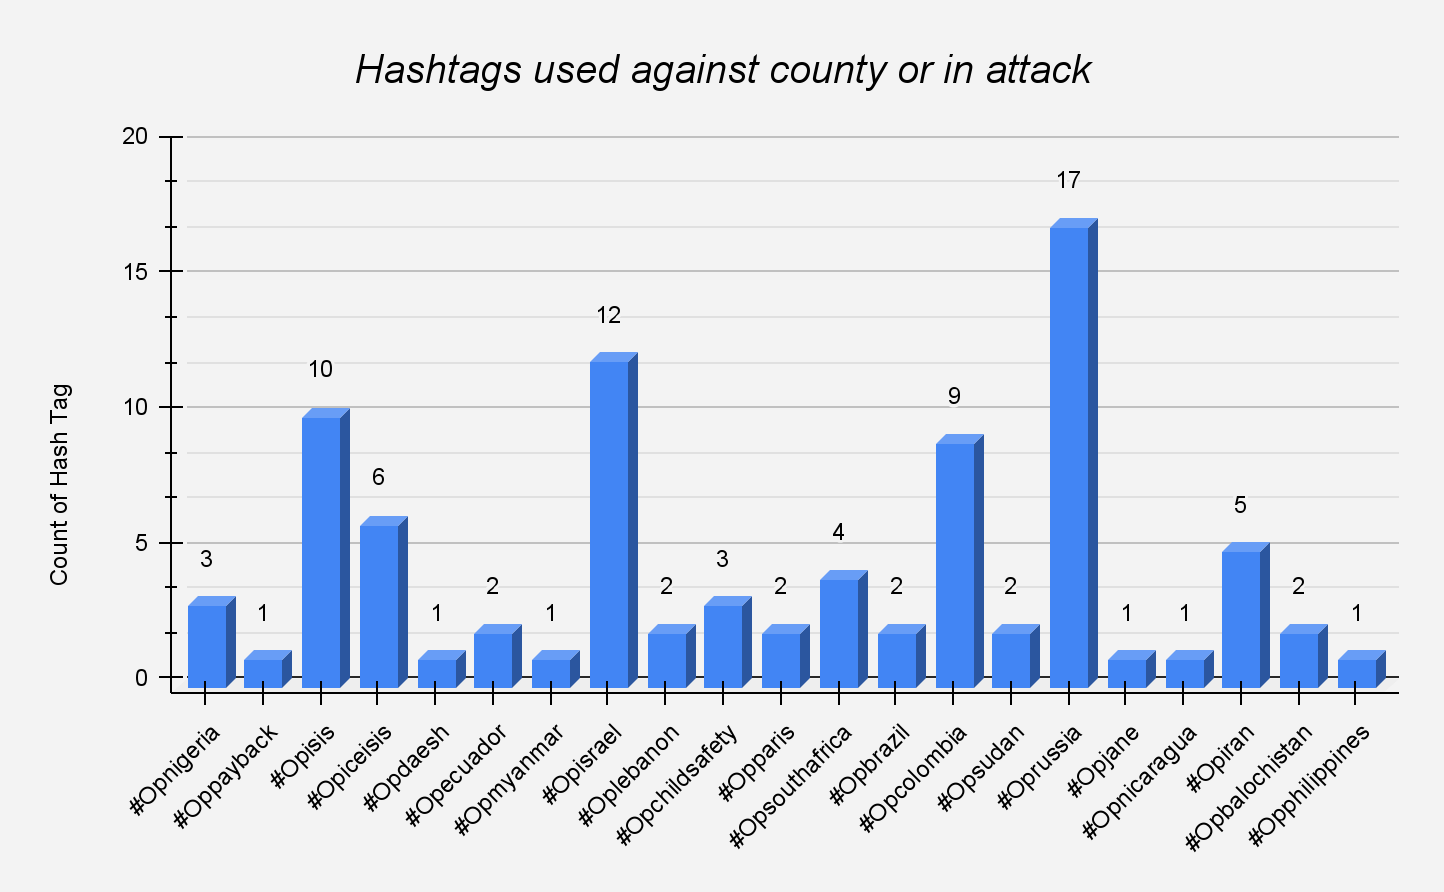 Figure 4 – Country name with hashtag and attack counts